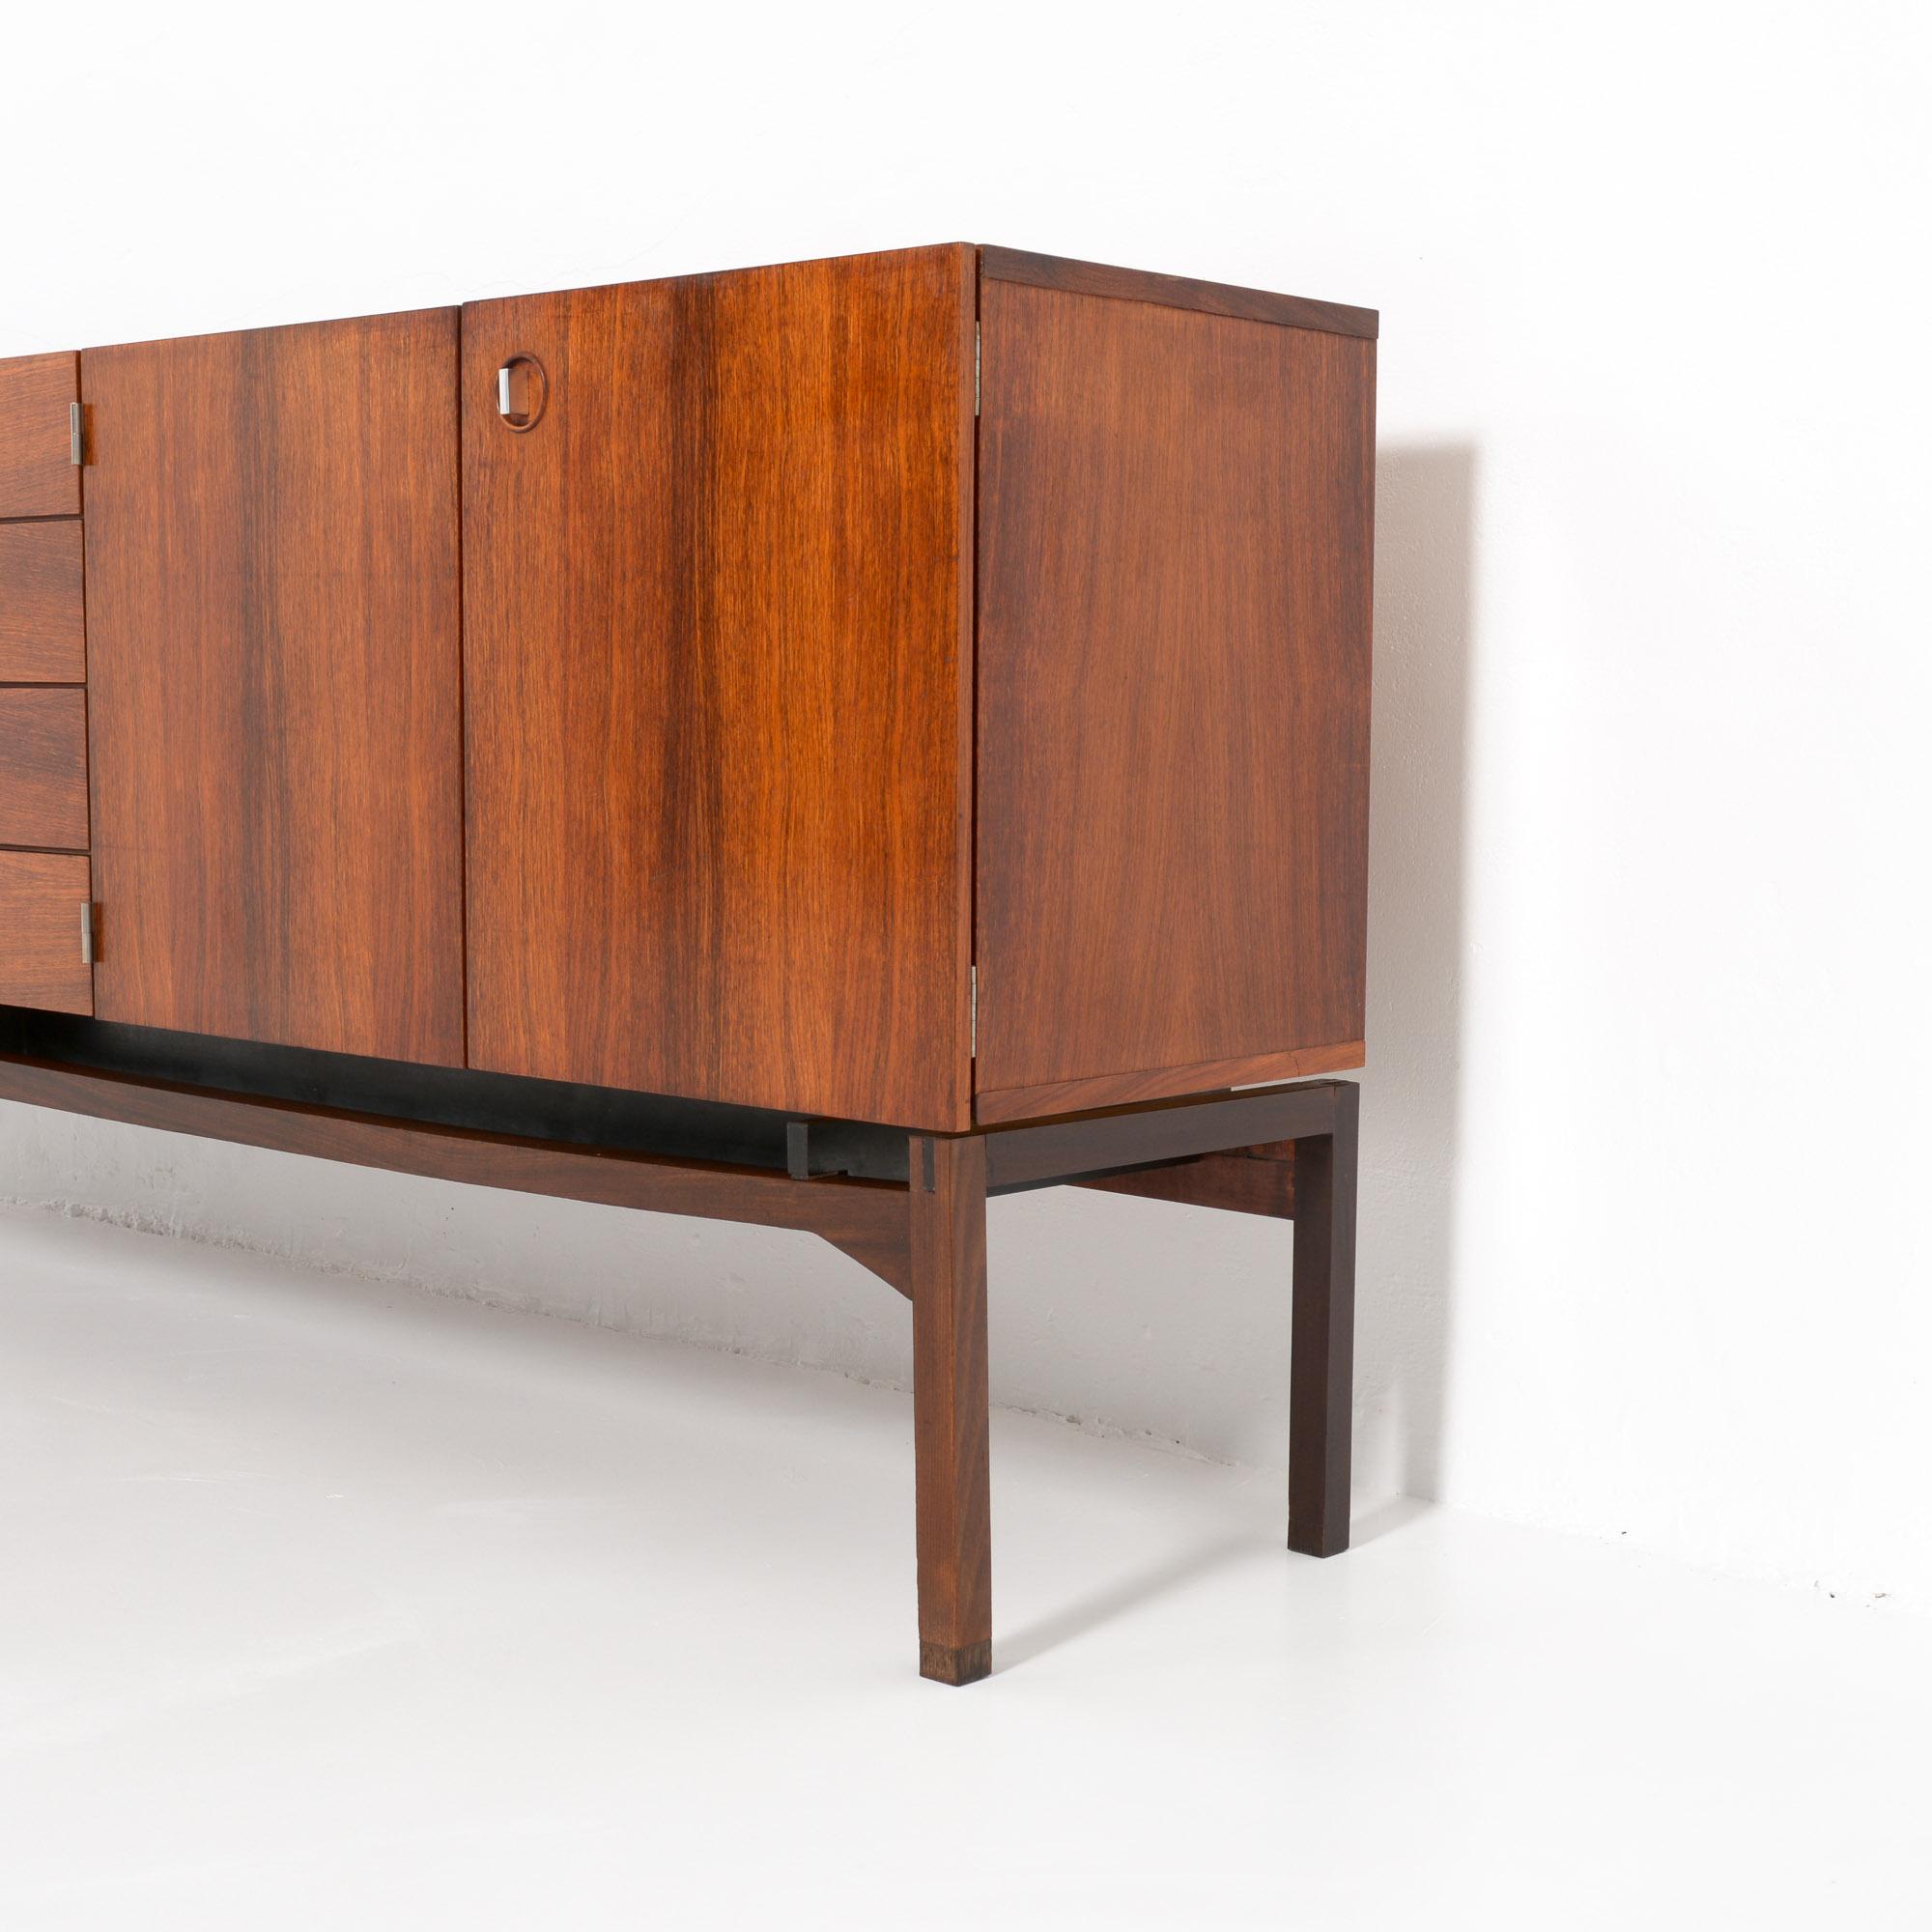 Mid-20th Century Sideboard Europ by Pieter De Bruyne for V-form